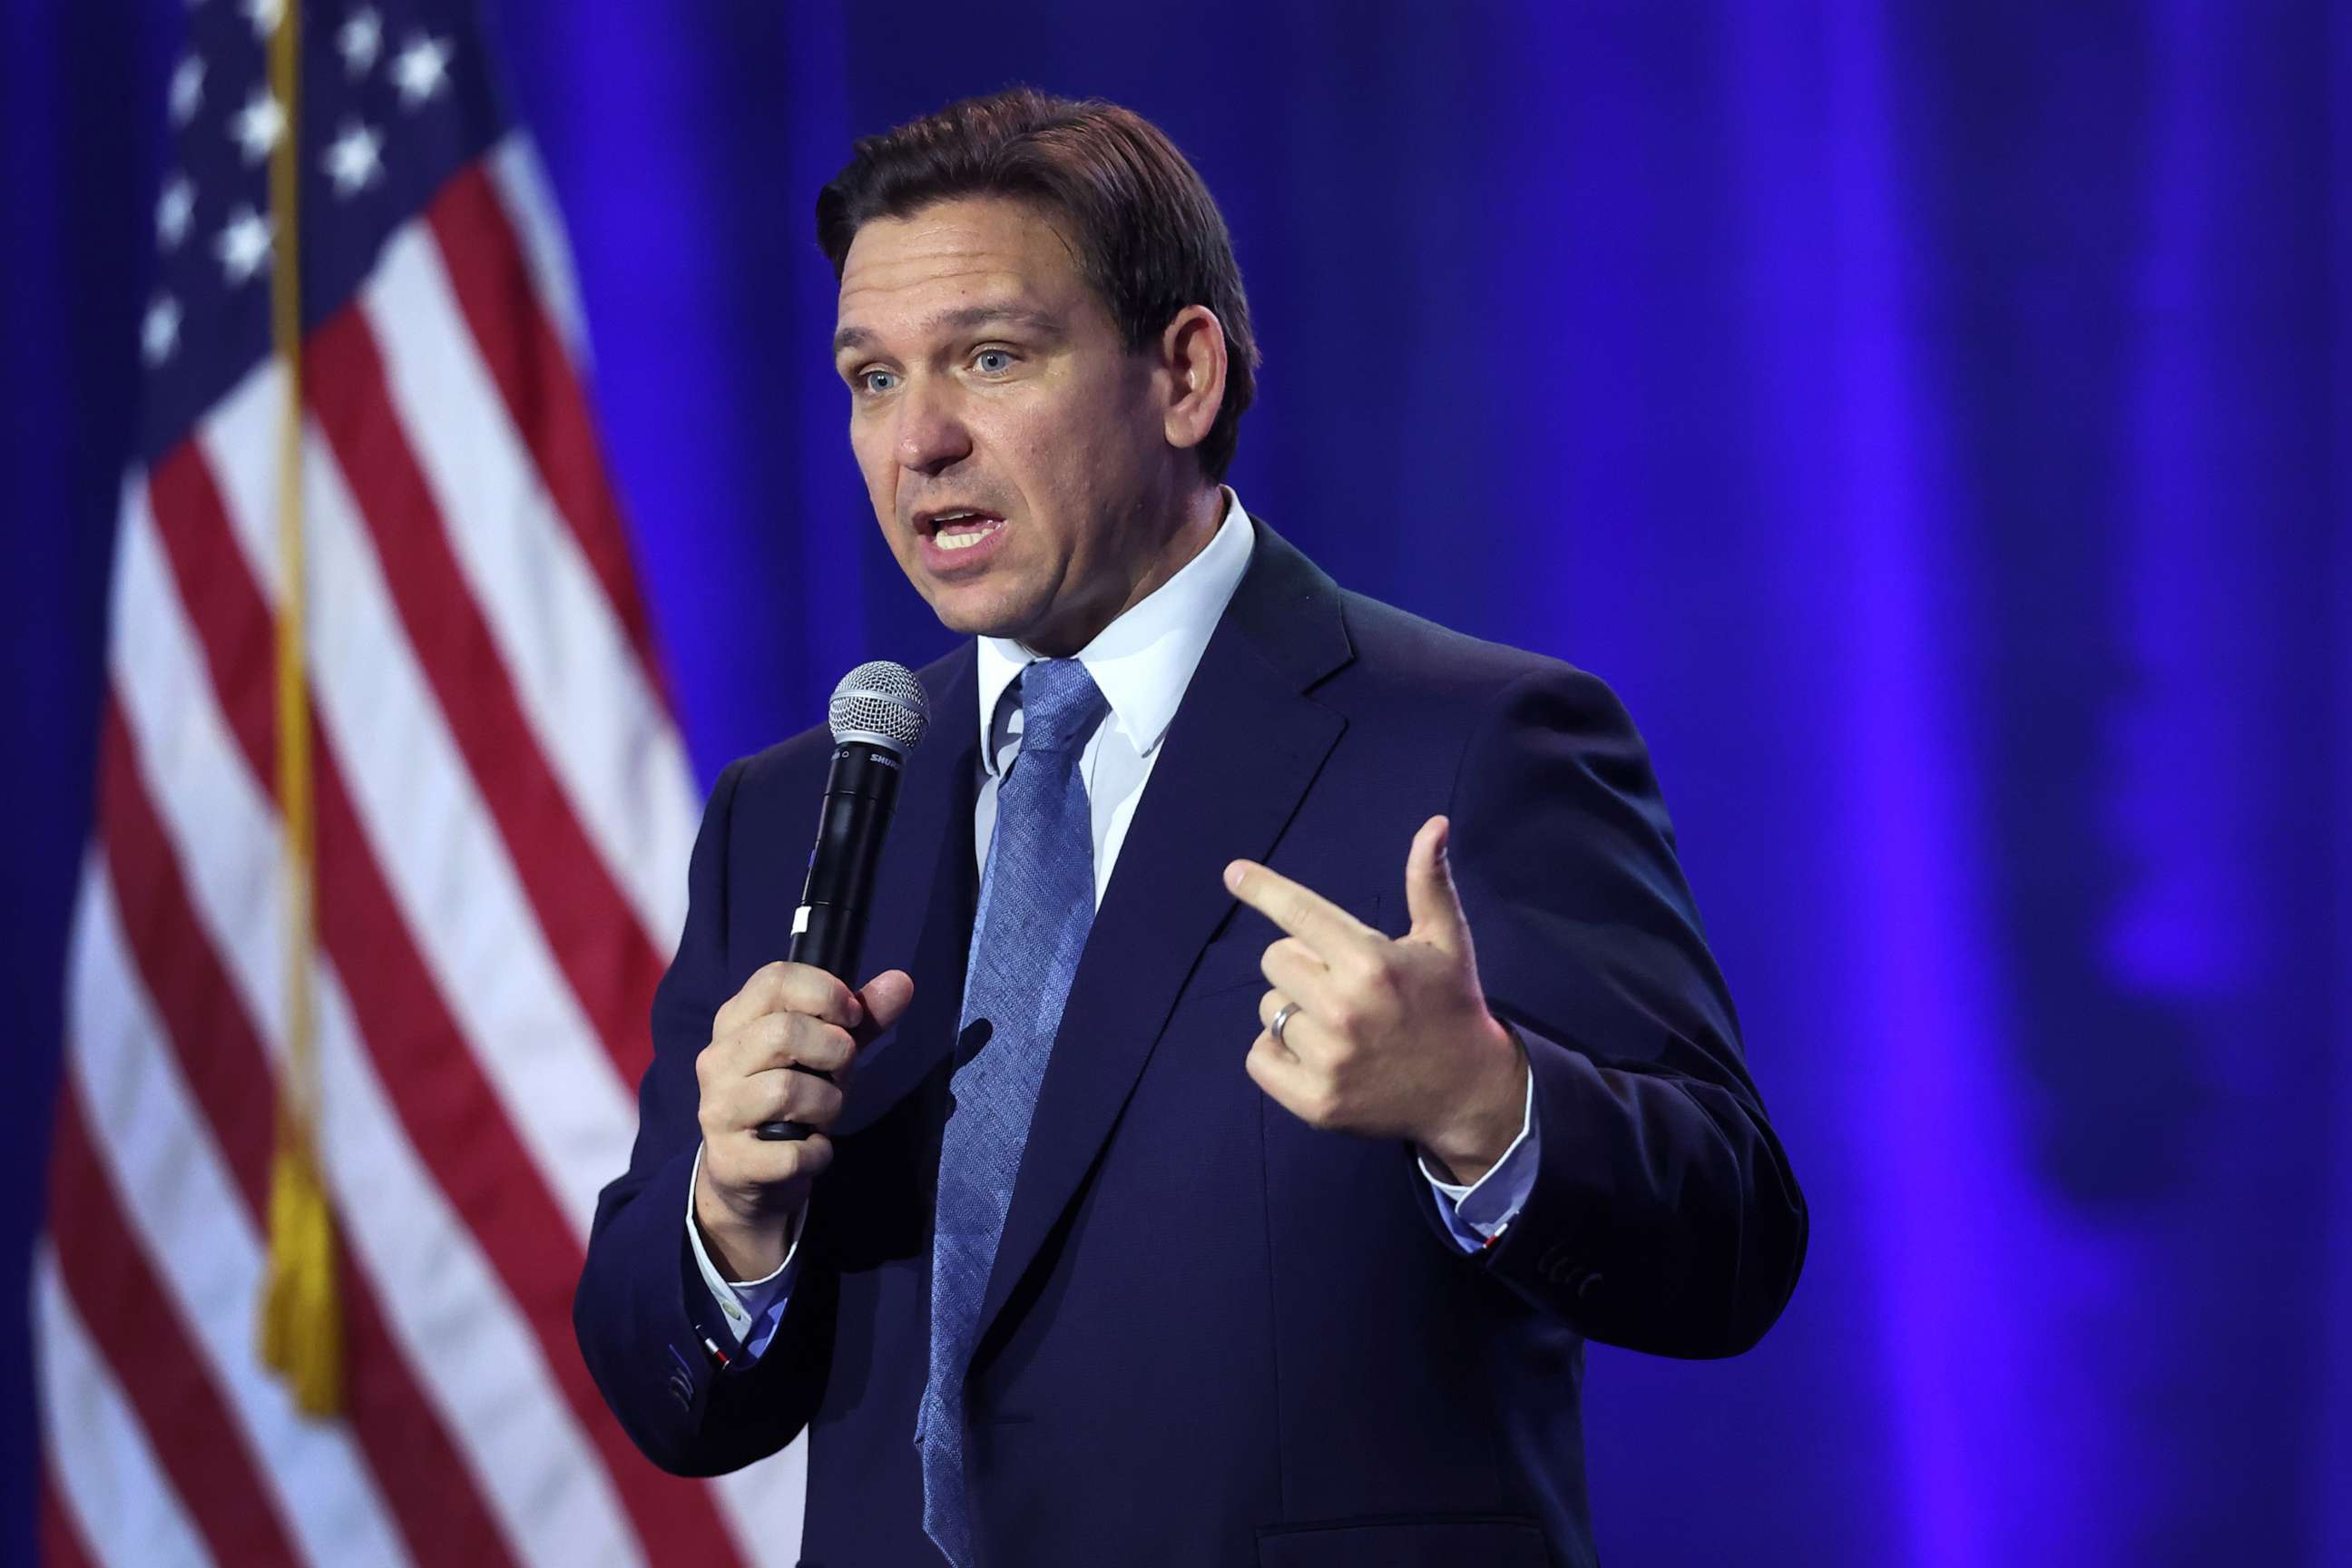 PHOTO: In this March 10, 2023, file photo, Florida Gov. Ron DeSantis speaks to Iowa voters gathered at the Iowa State Fairgrounds, in Des Moines, Iowa.